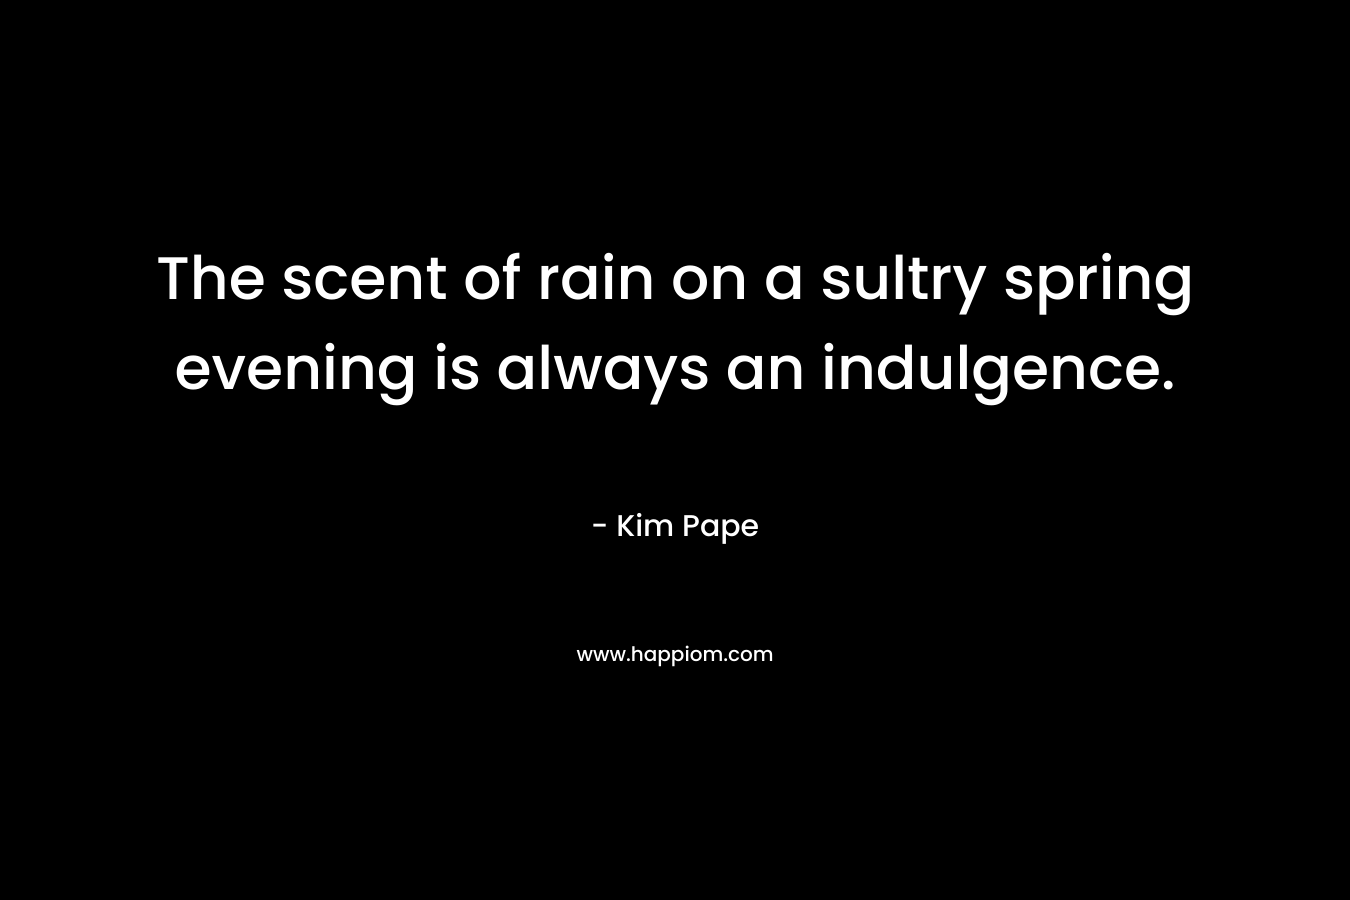 The scent of rain on a sultry spring evening is always an indulgence. – Kim Pape